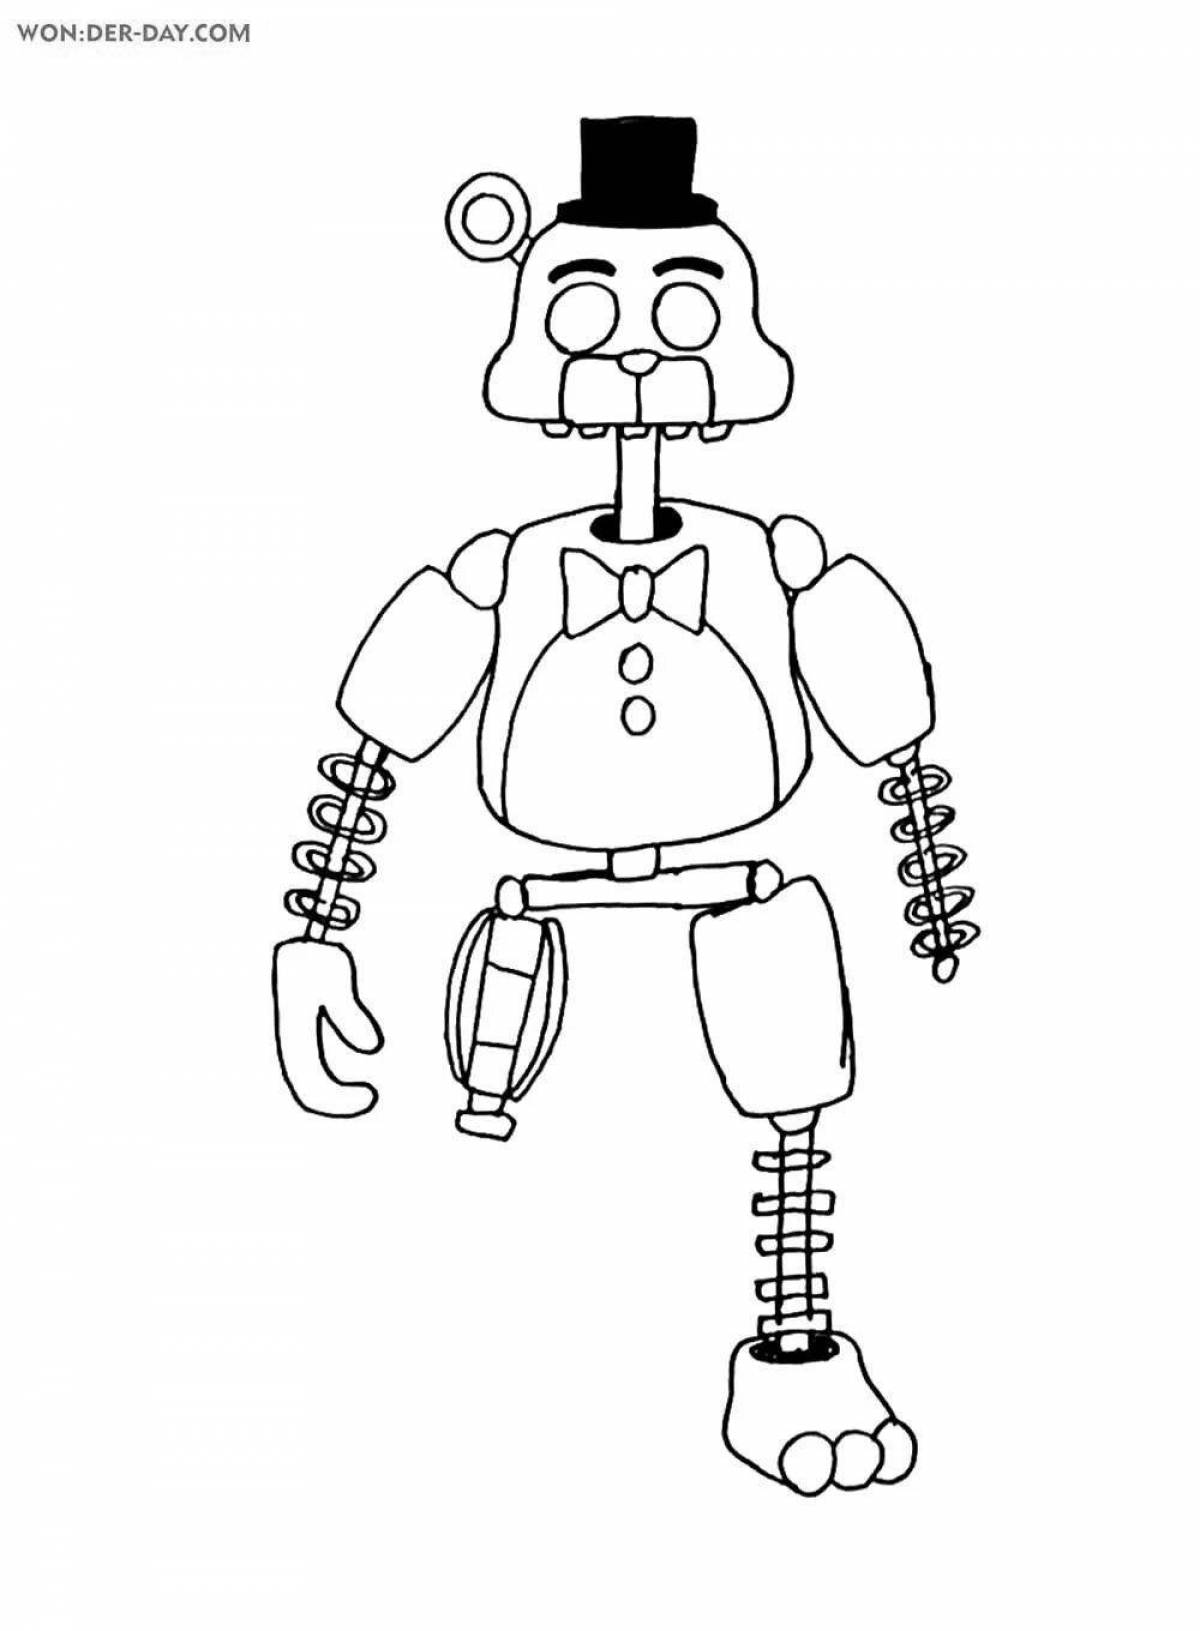 Amazing golden freddy coloring book